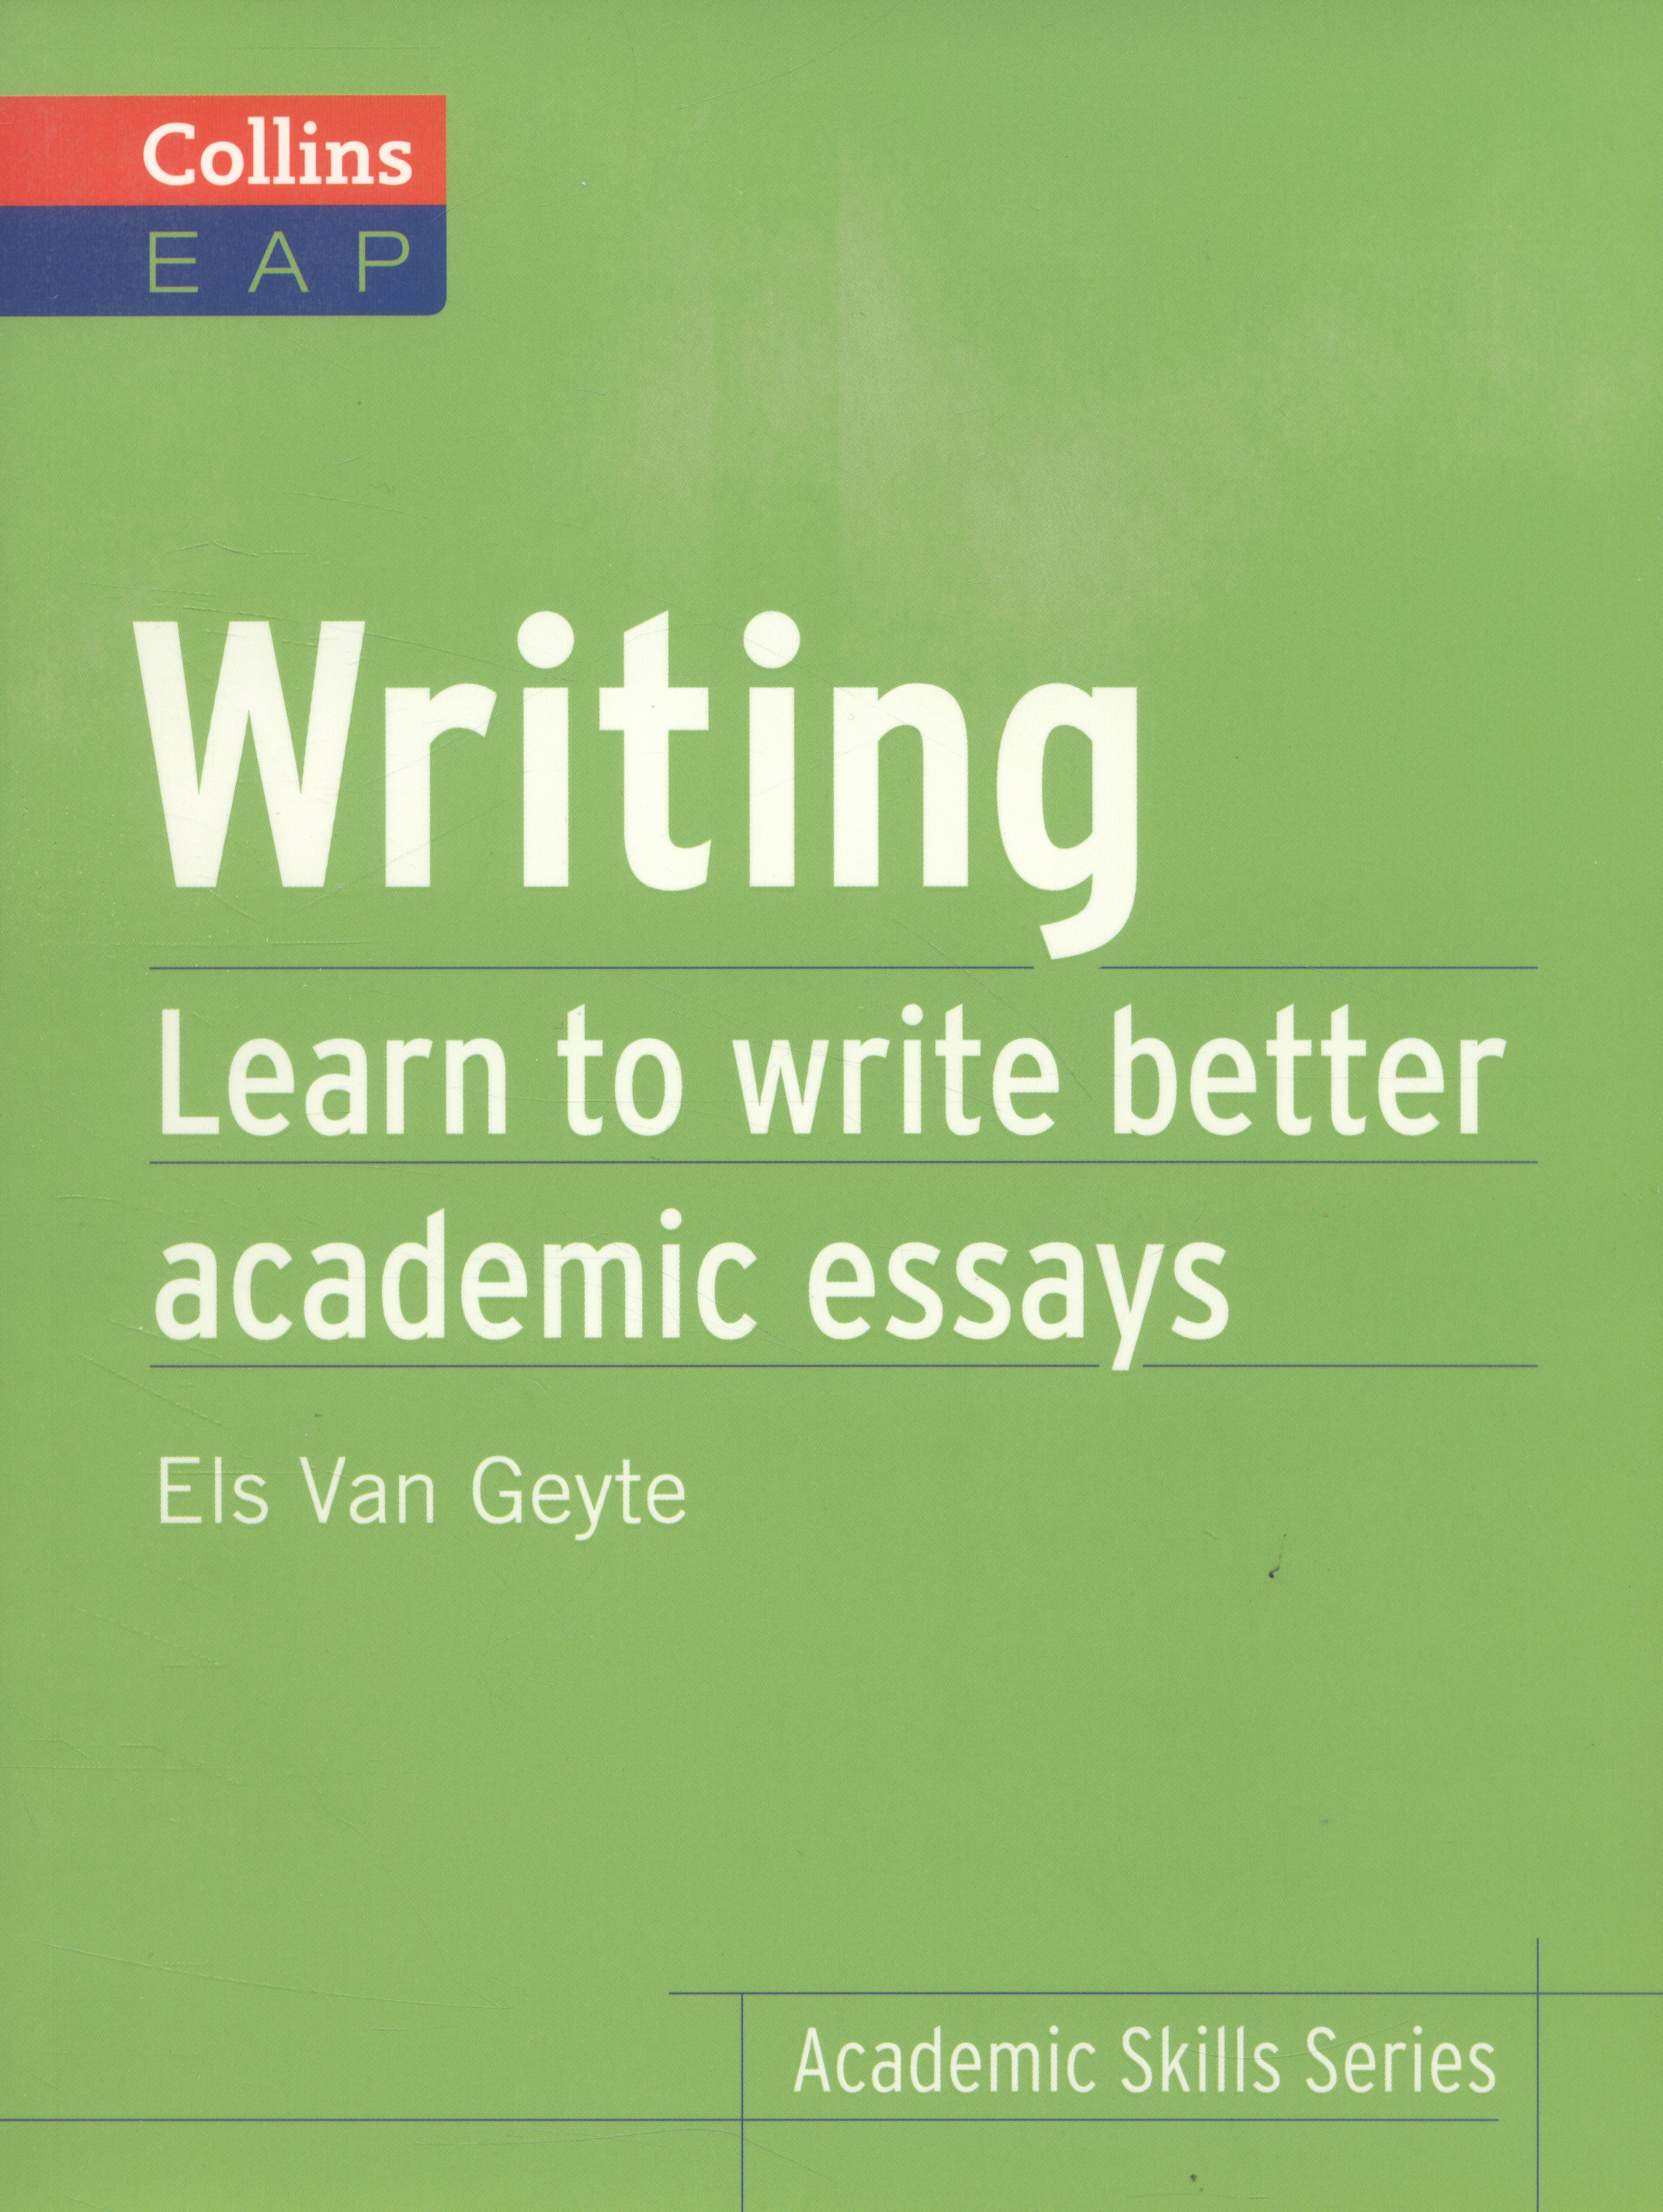 book on essays writing